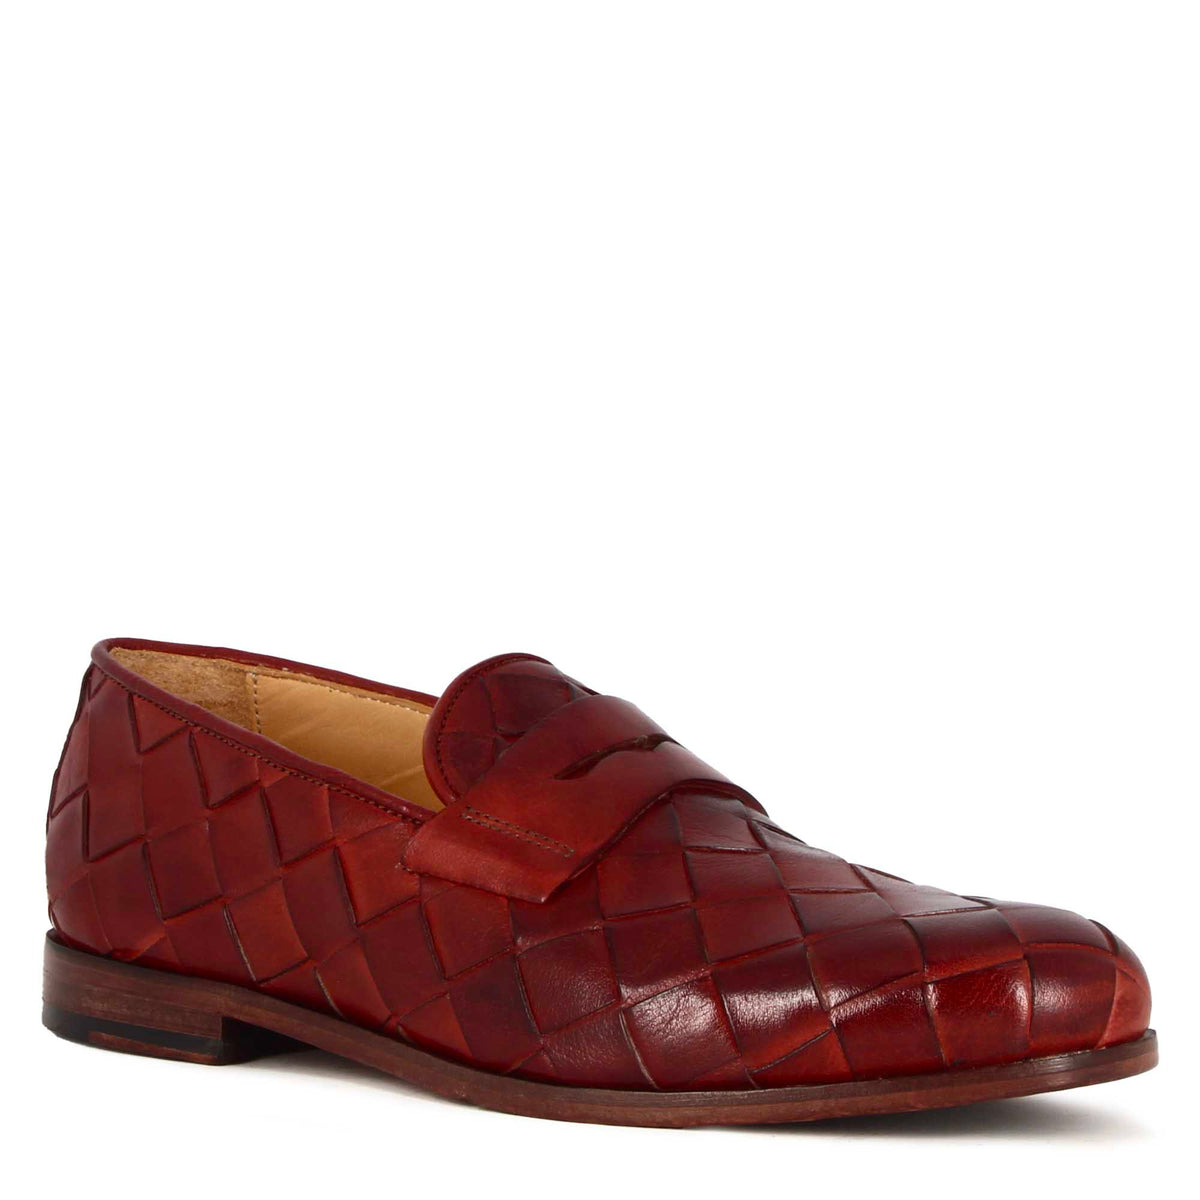 Handmade red woven leather men's moccasin